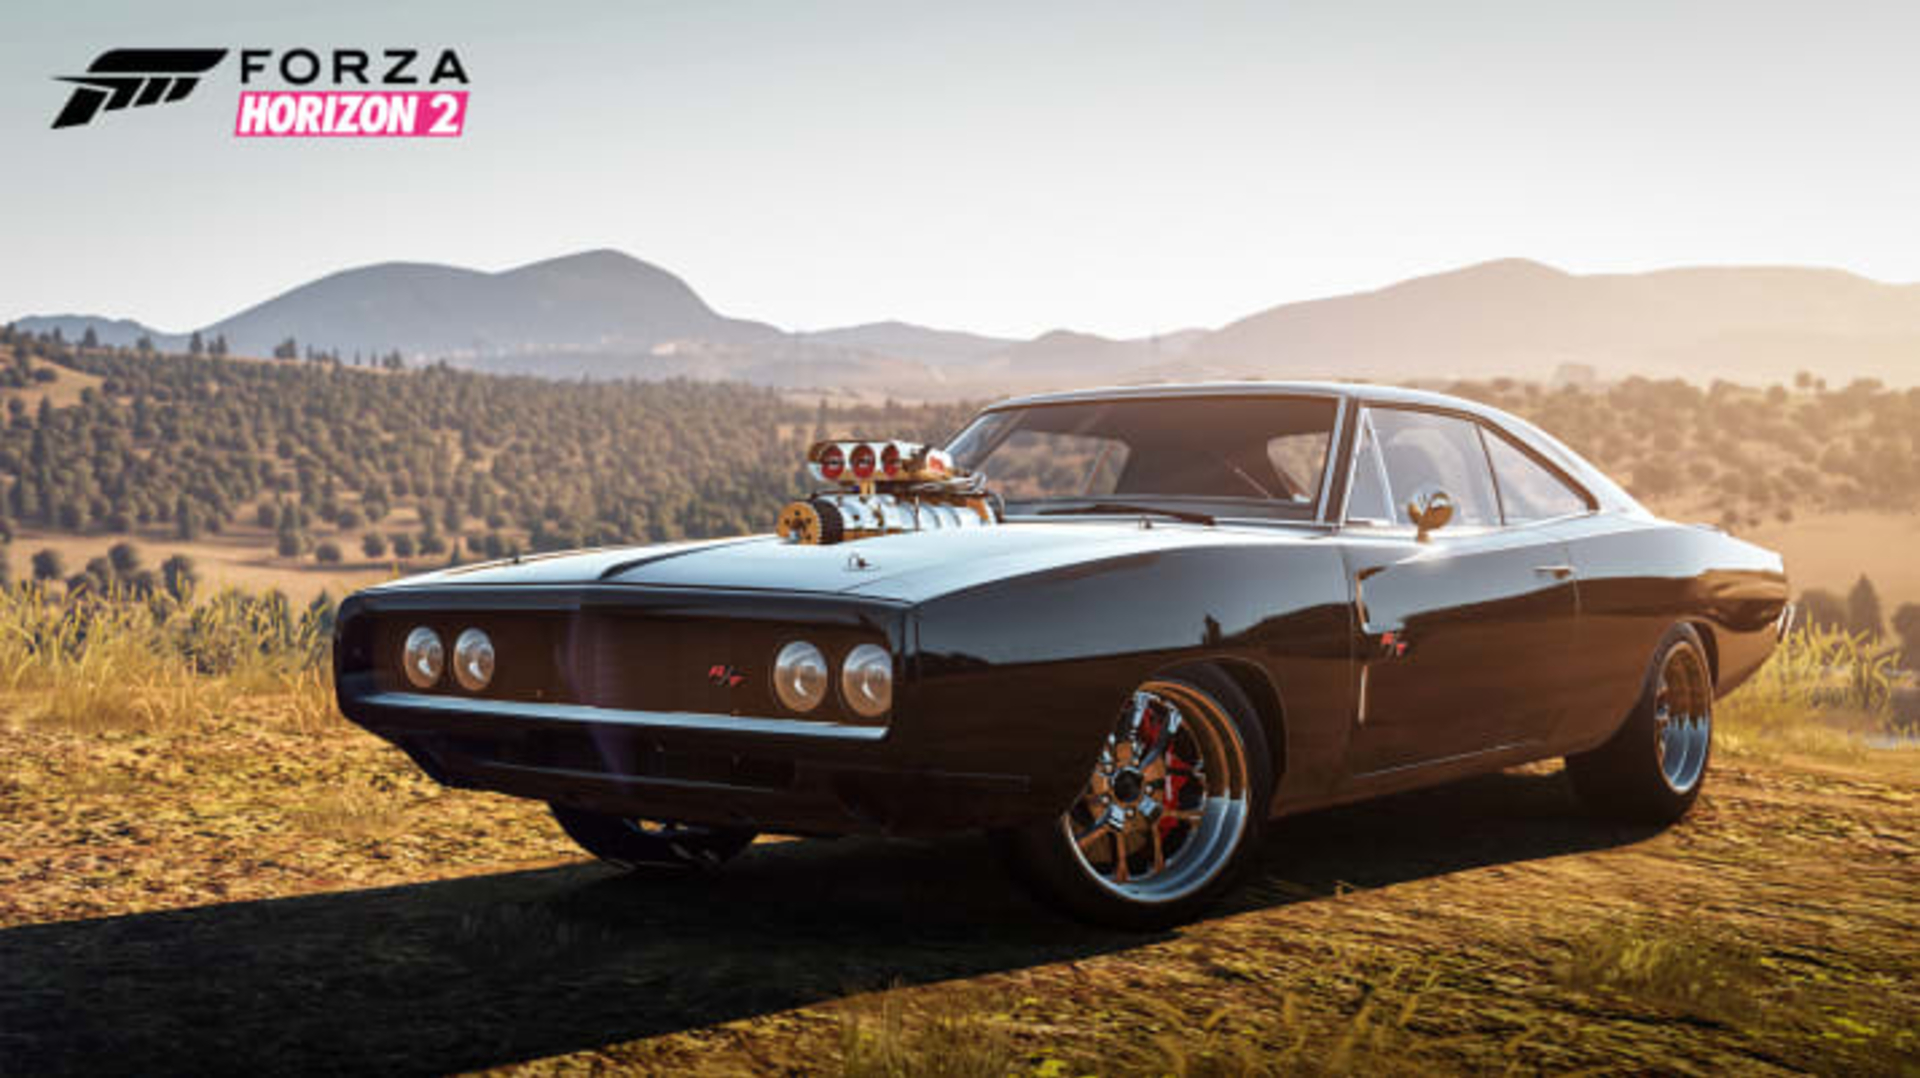 Forza Horizon 2 Presents Fast and Furious 1970 Dodge Charger R/T